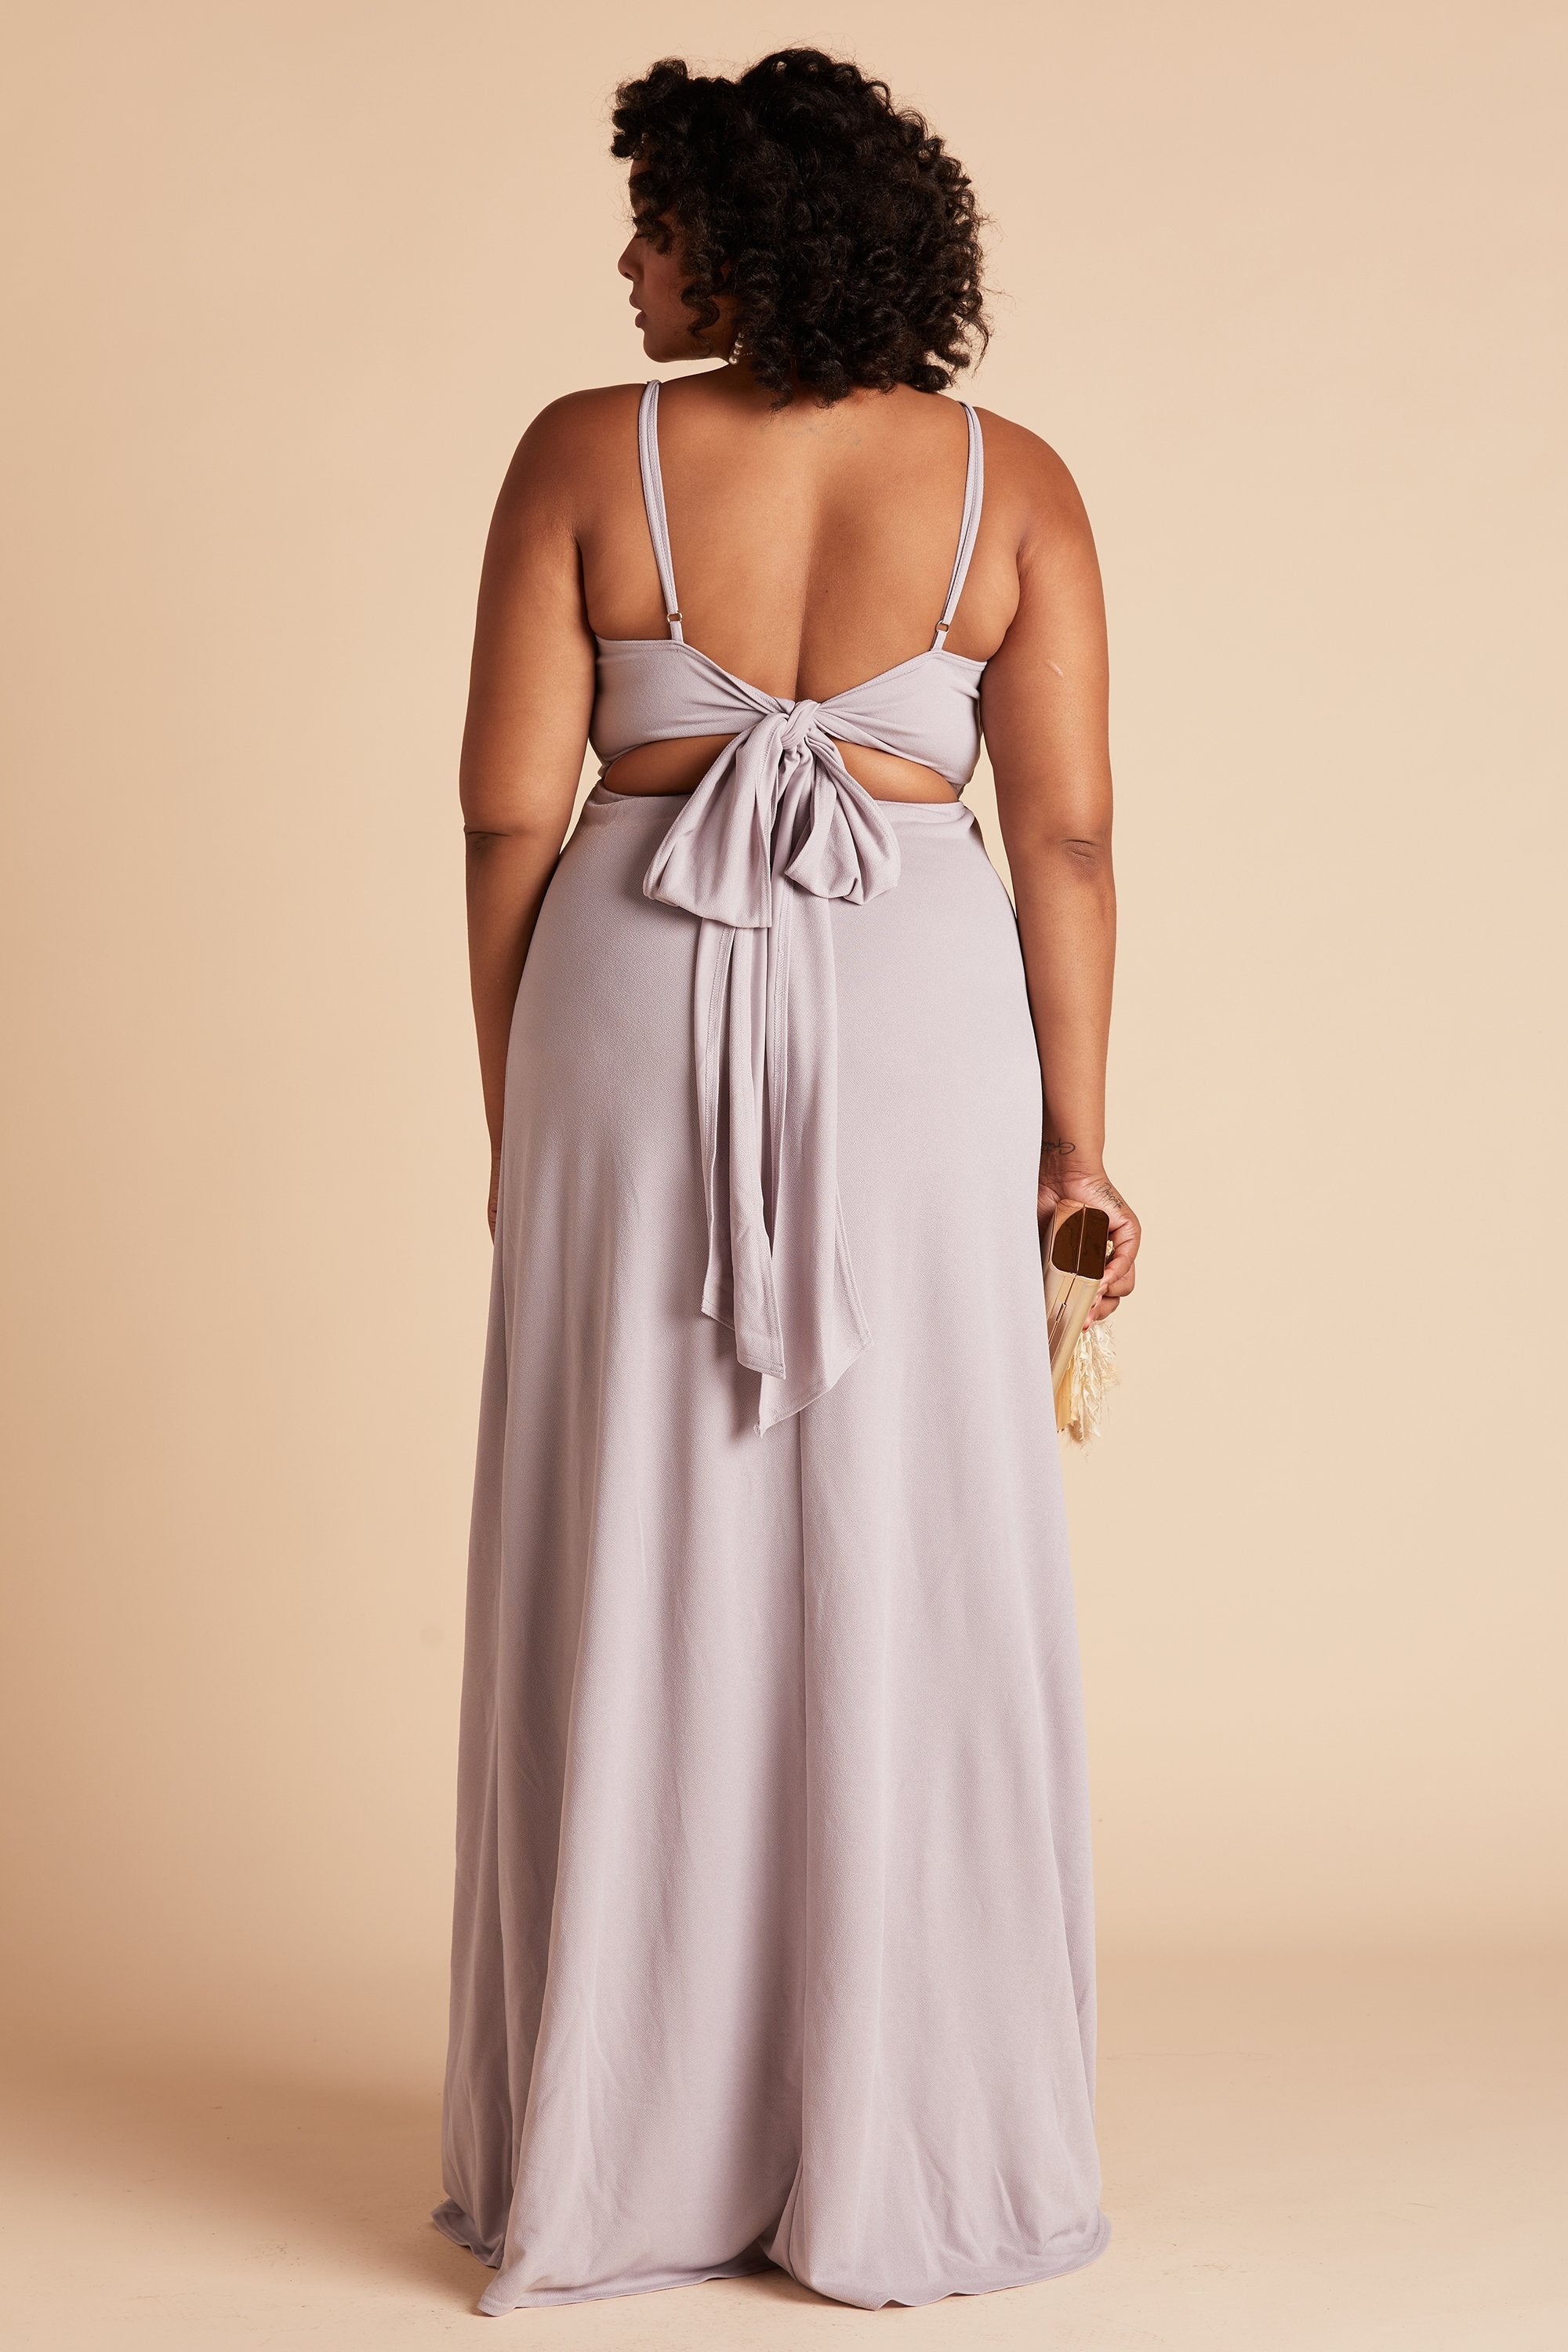 Benny plus size bridesmaid dress in lilac purple crepe by Birdy Grey, back view